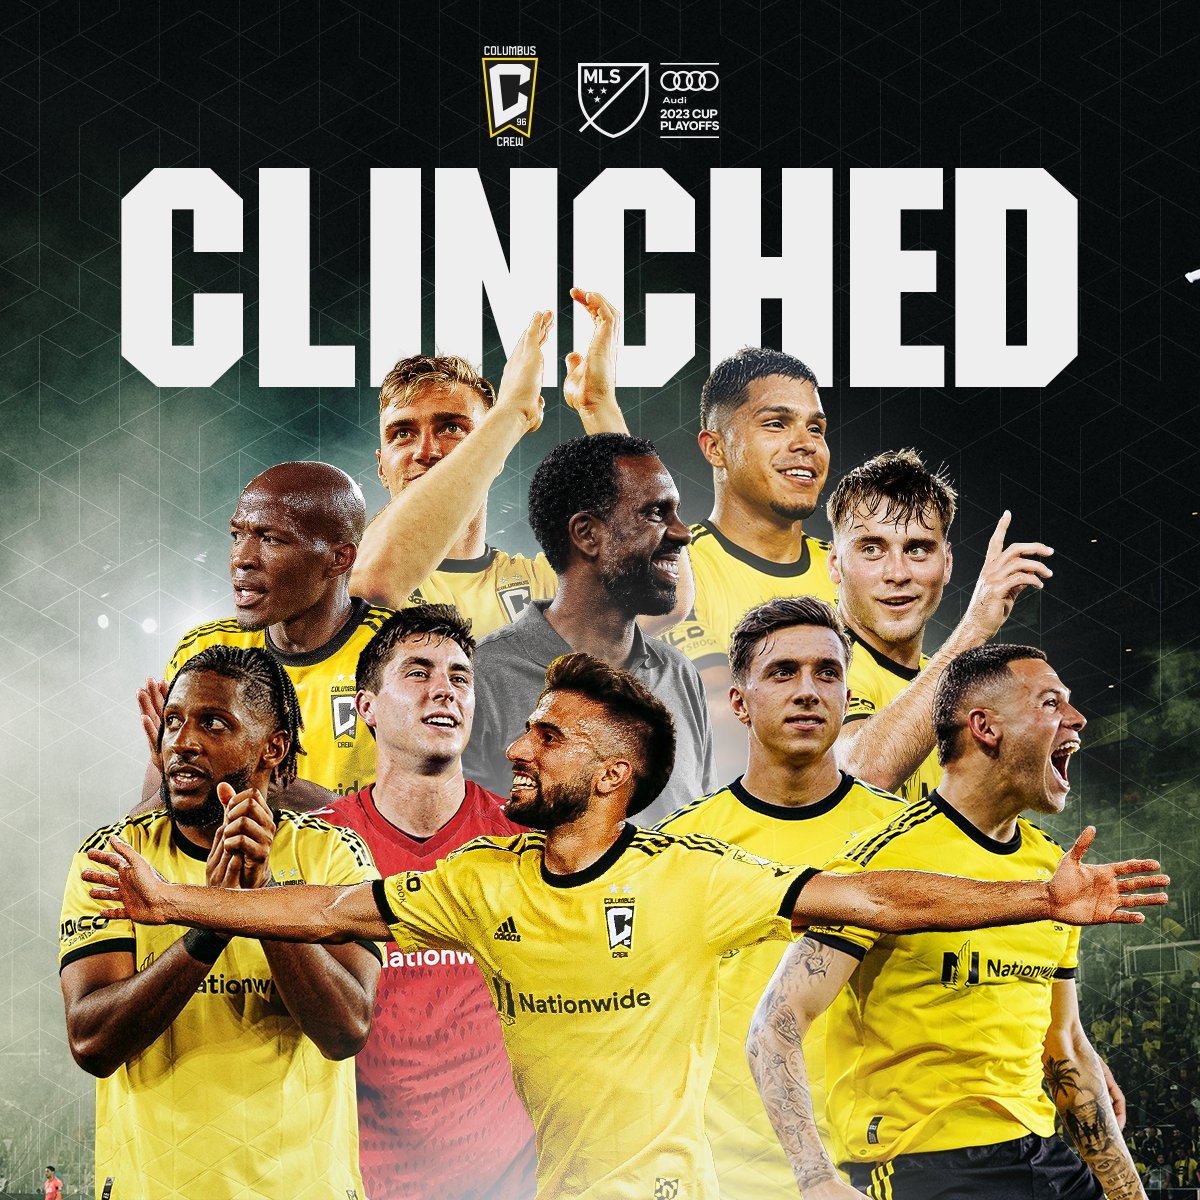 Columbus Crew SC clinches spot in MLS playoffs after Sunday win